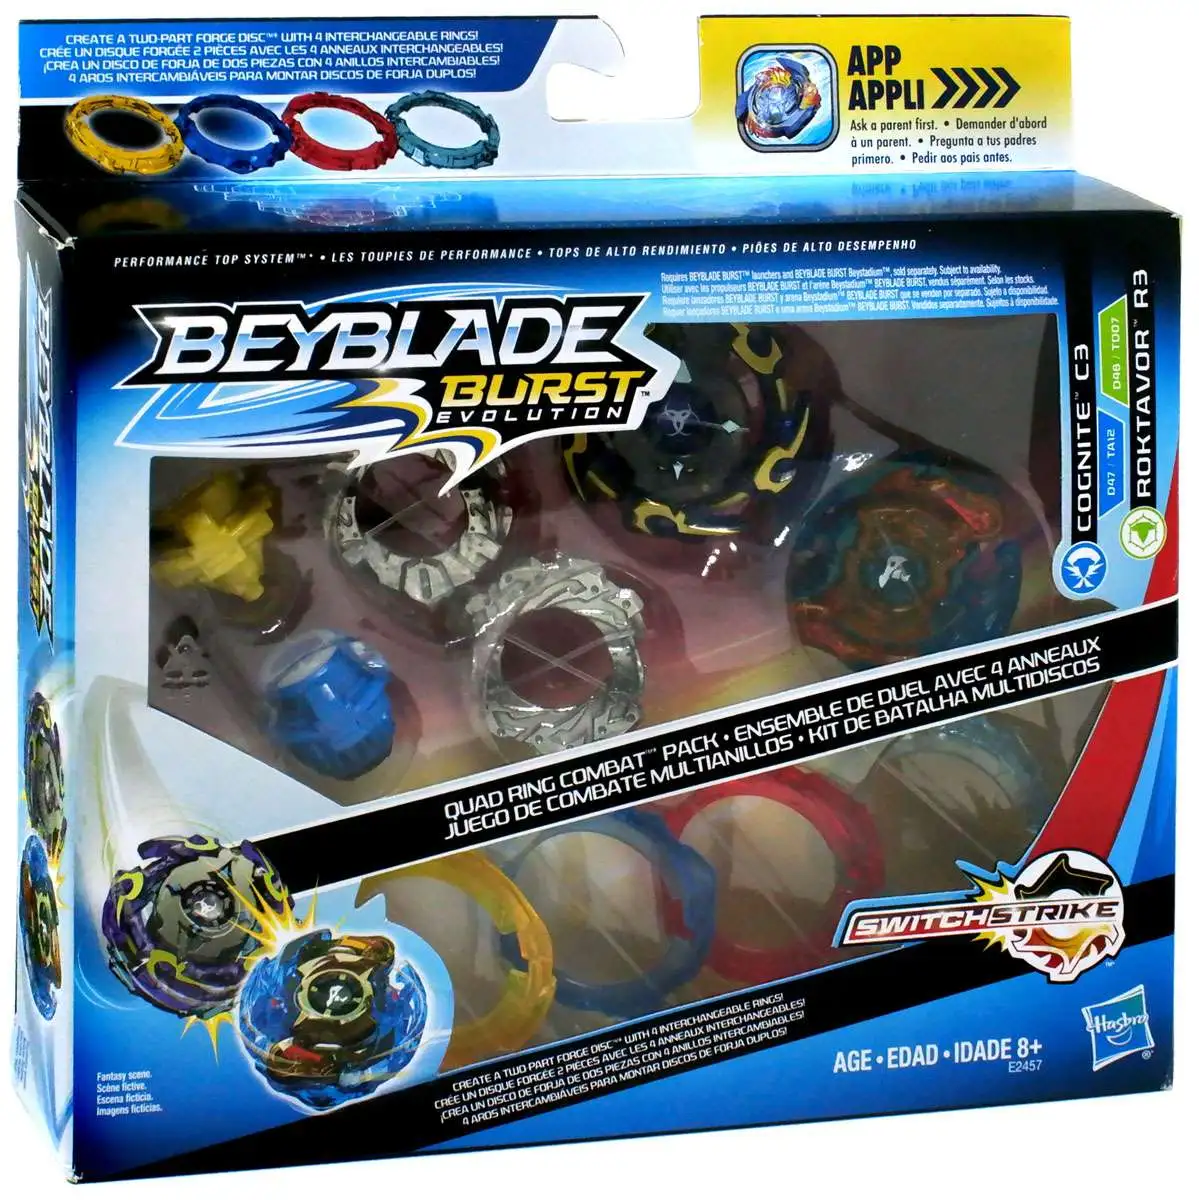 Beyblade Burst Quadstrike Toys, Games, Accessories and Battlesets - Hasbro